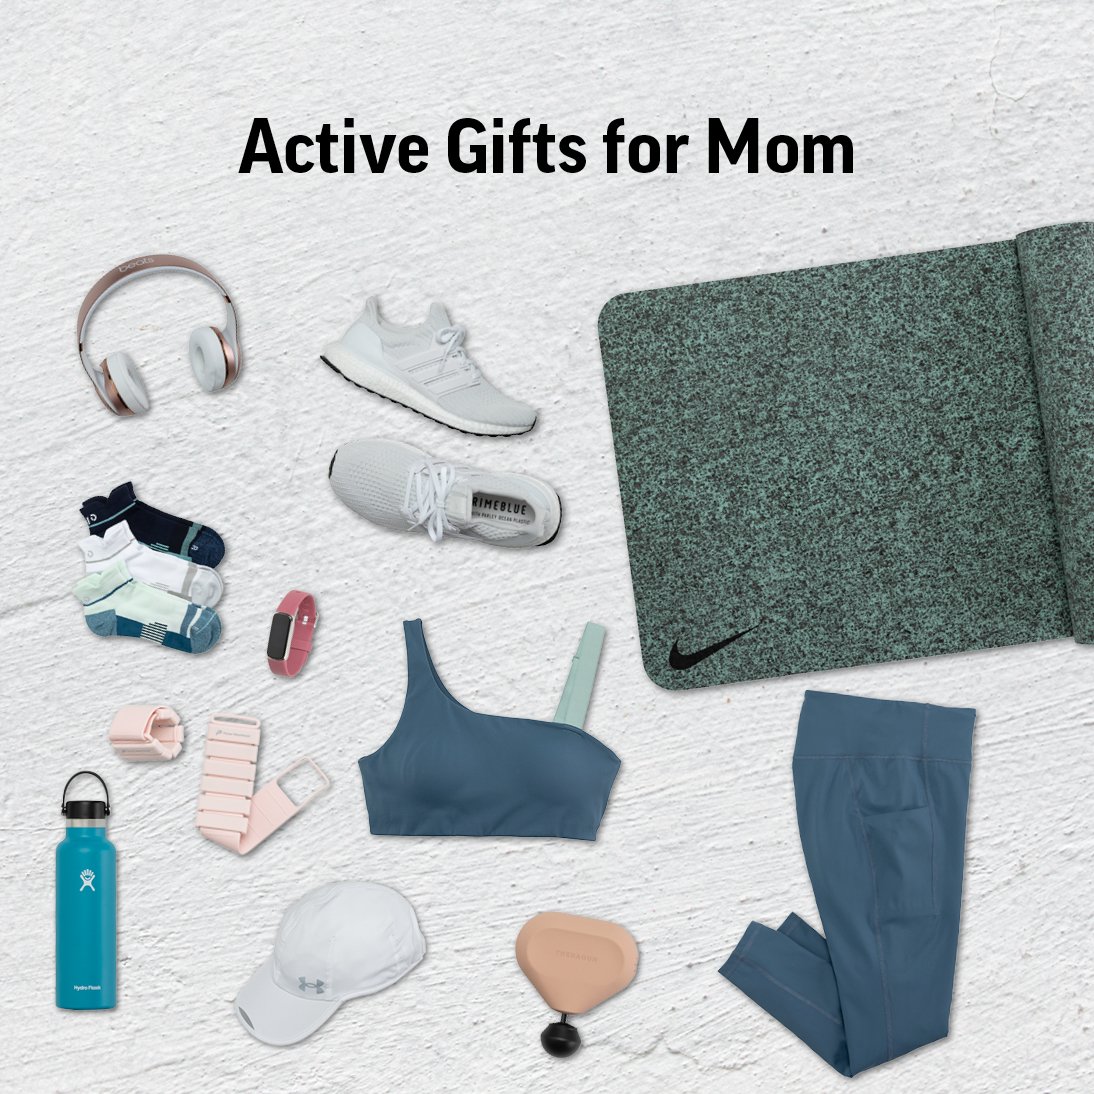 ACTIVE GIFTS FOR MOM